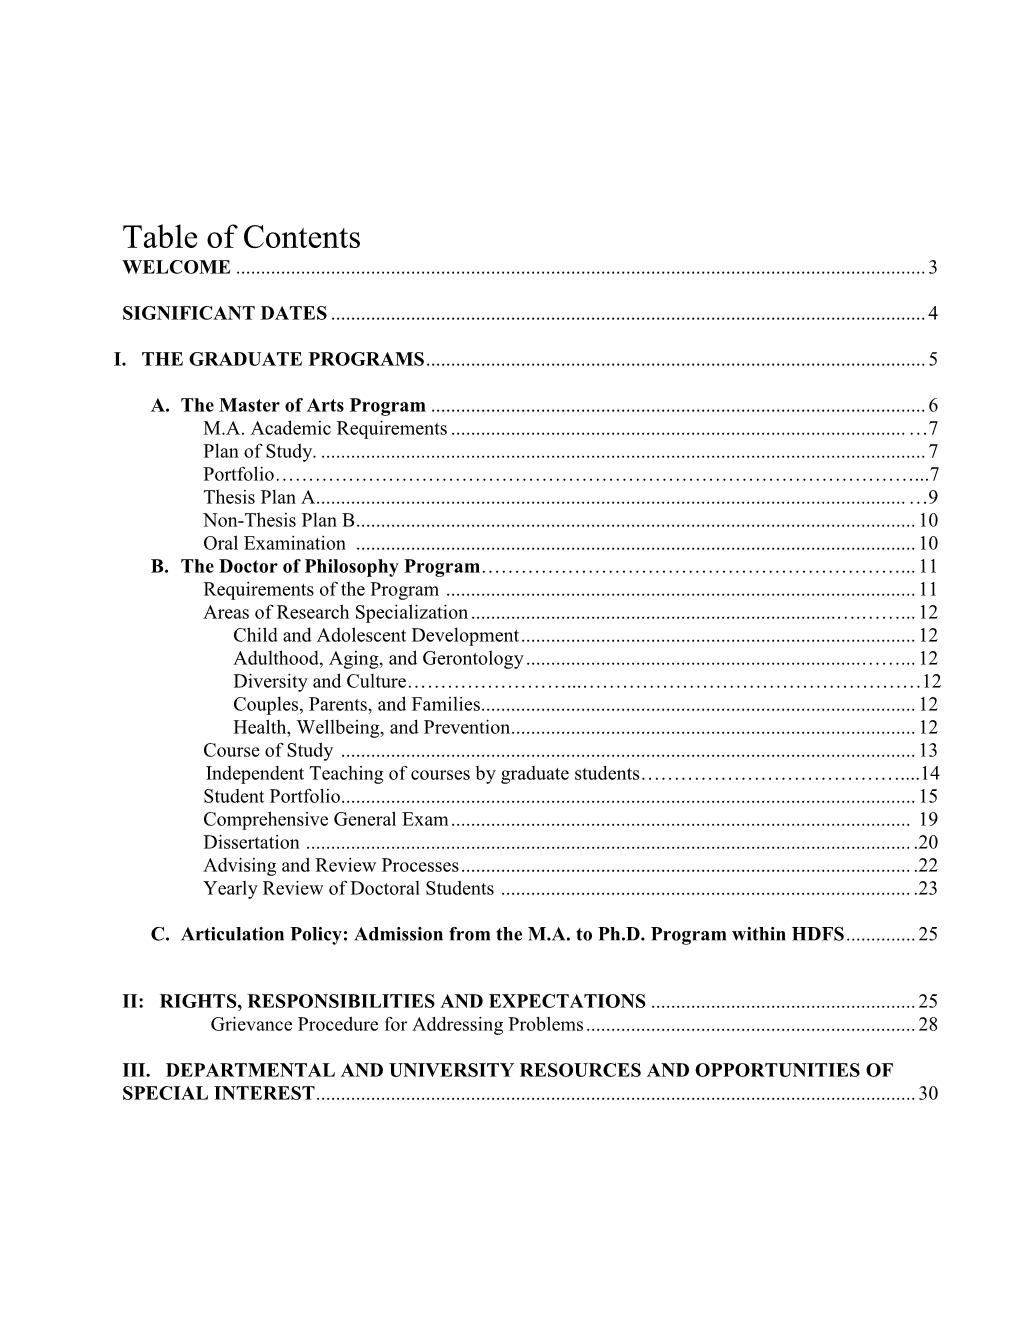 Table of Contents WELCOME